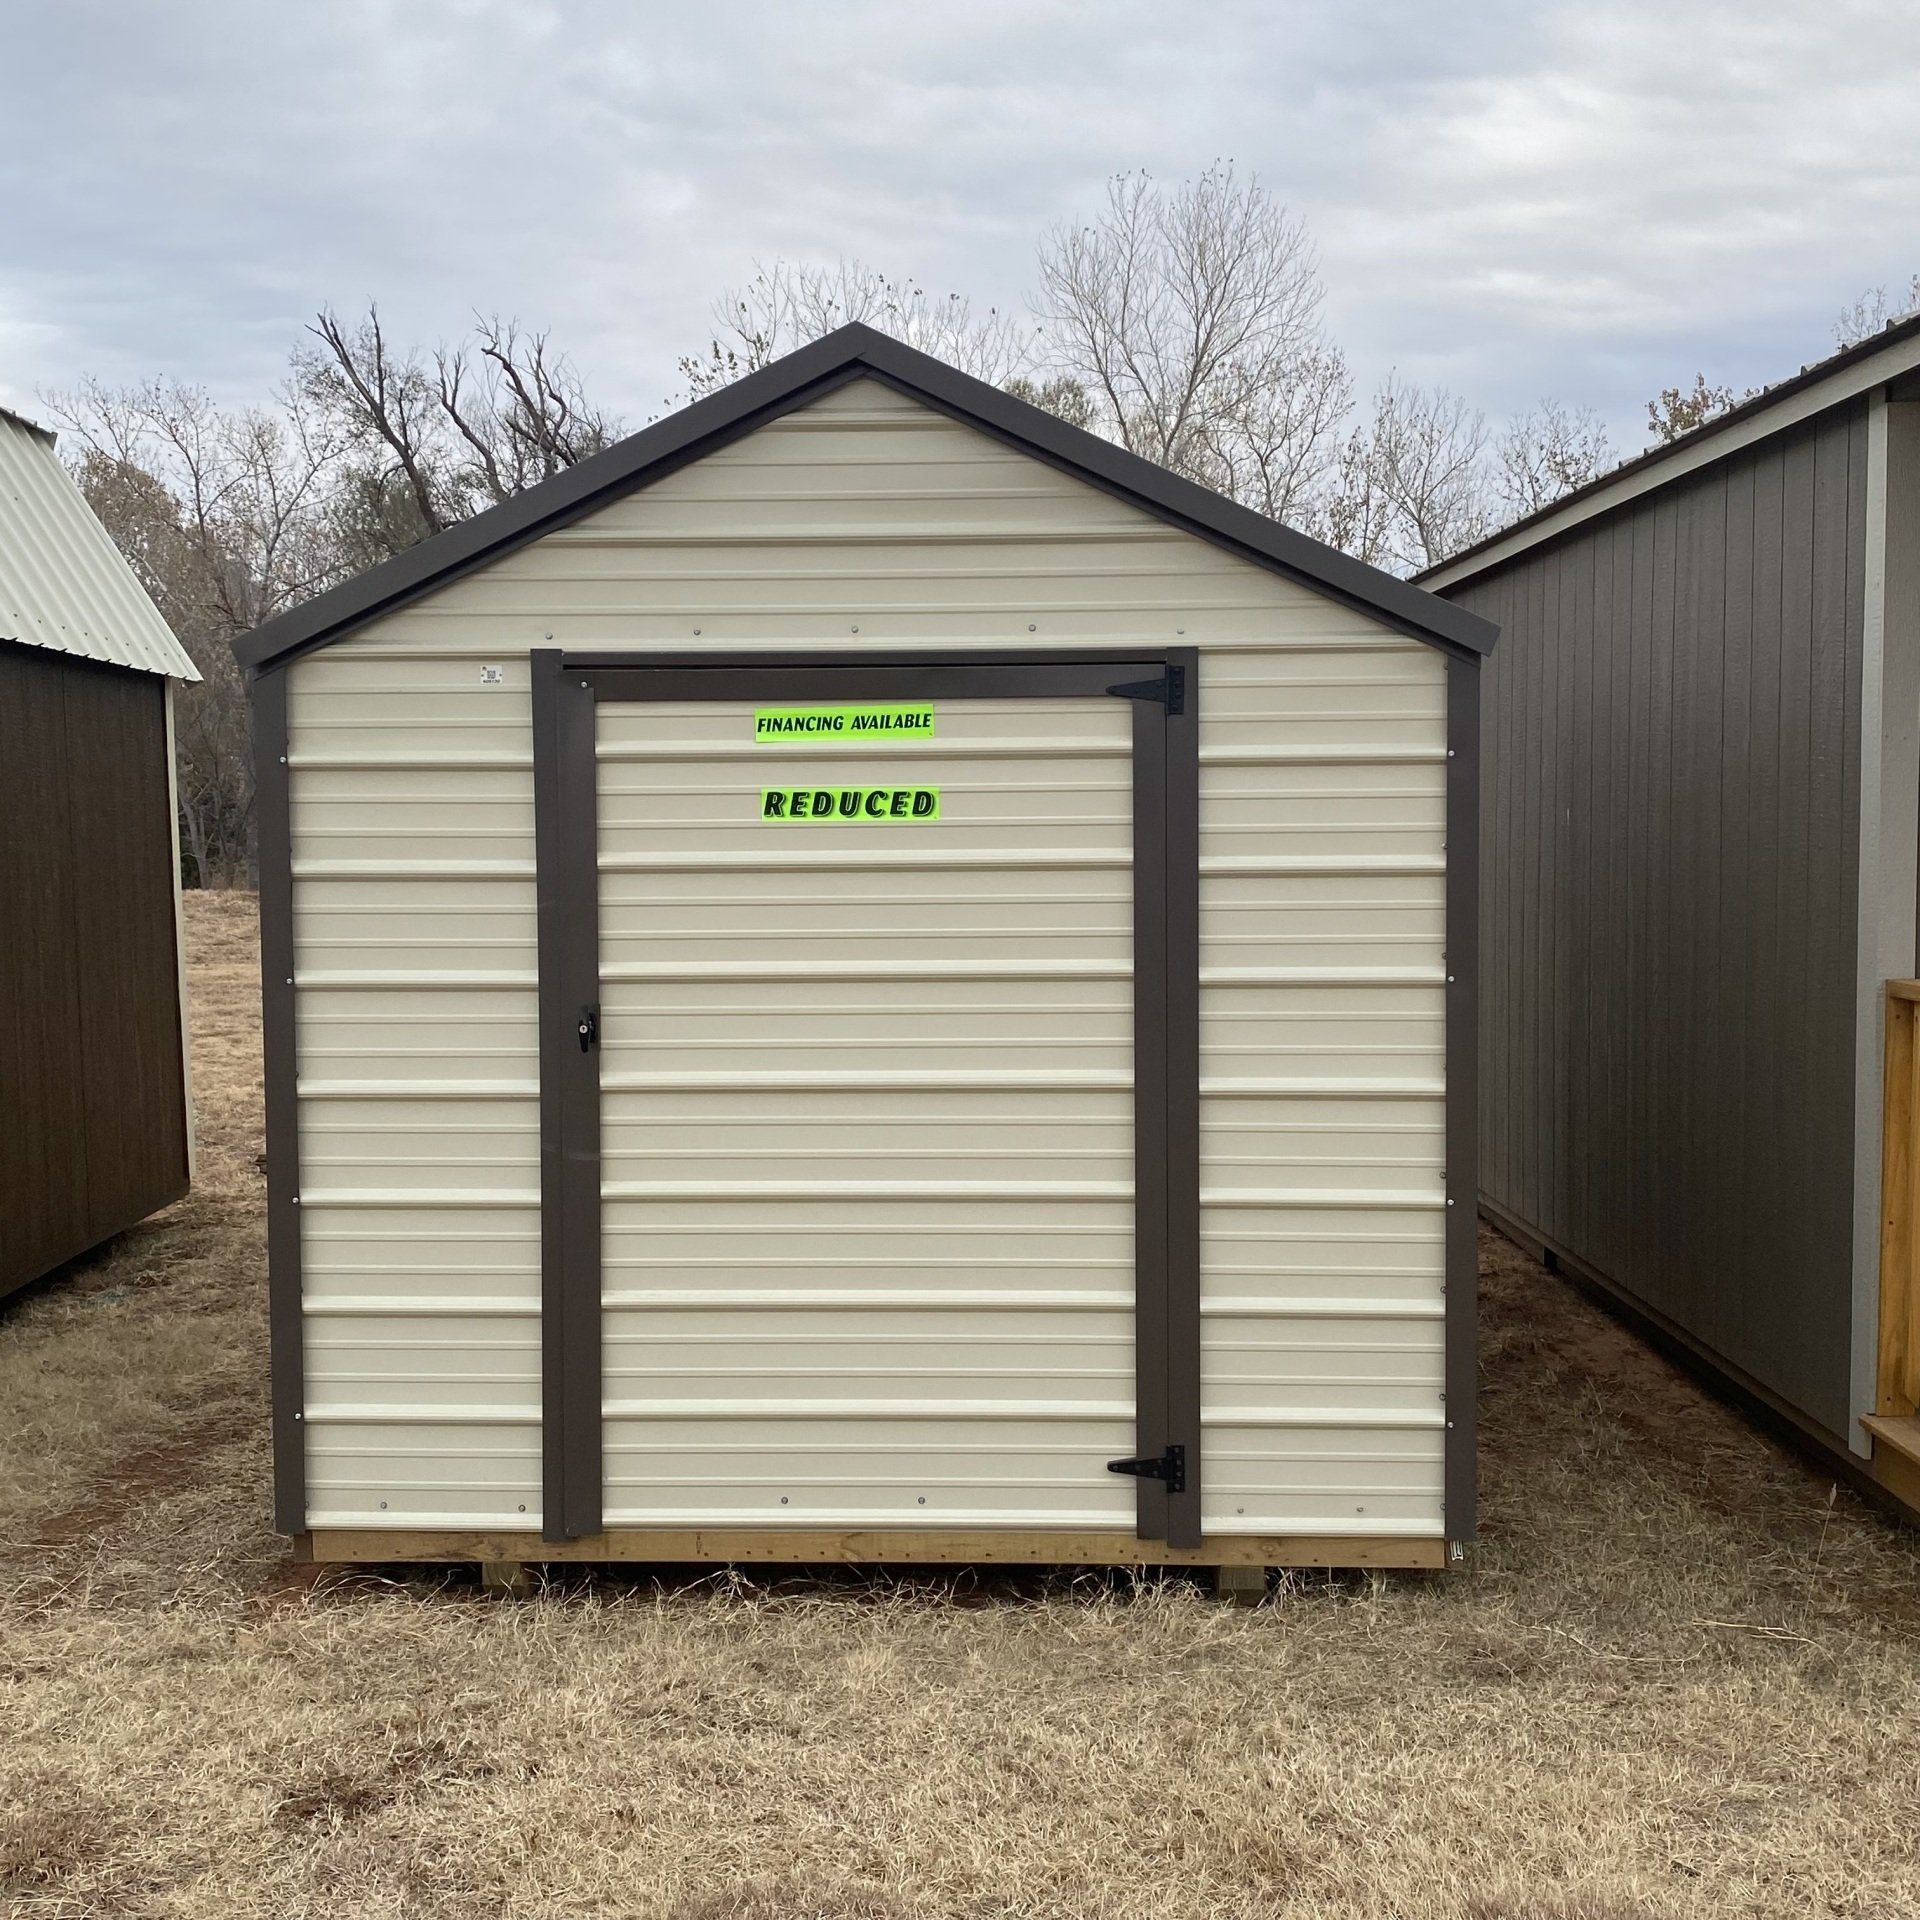 A white metal shed with a green sticker on the door